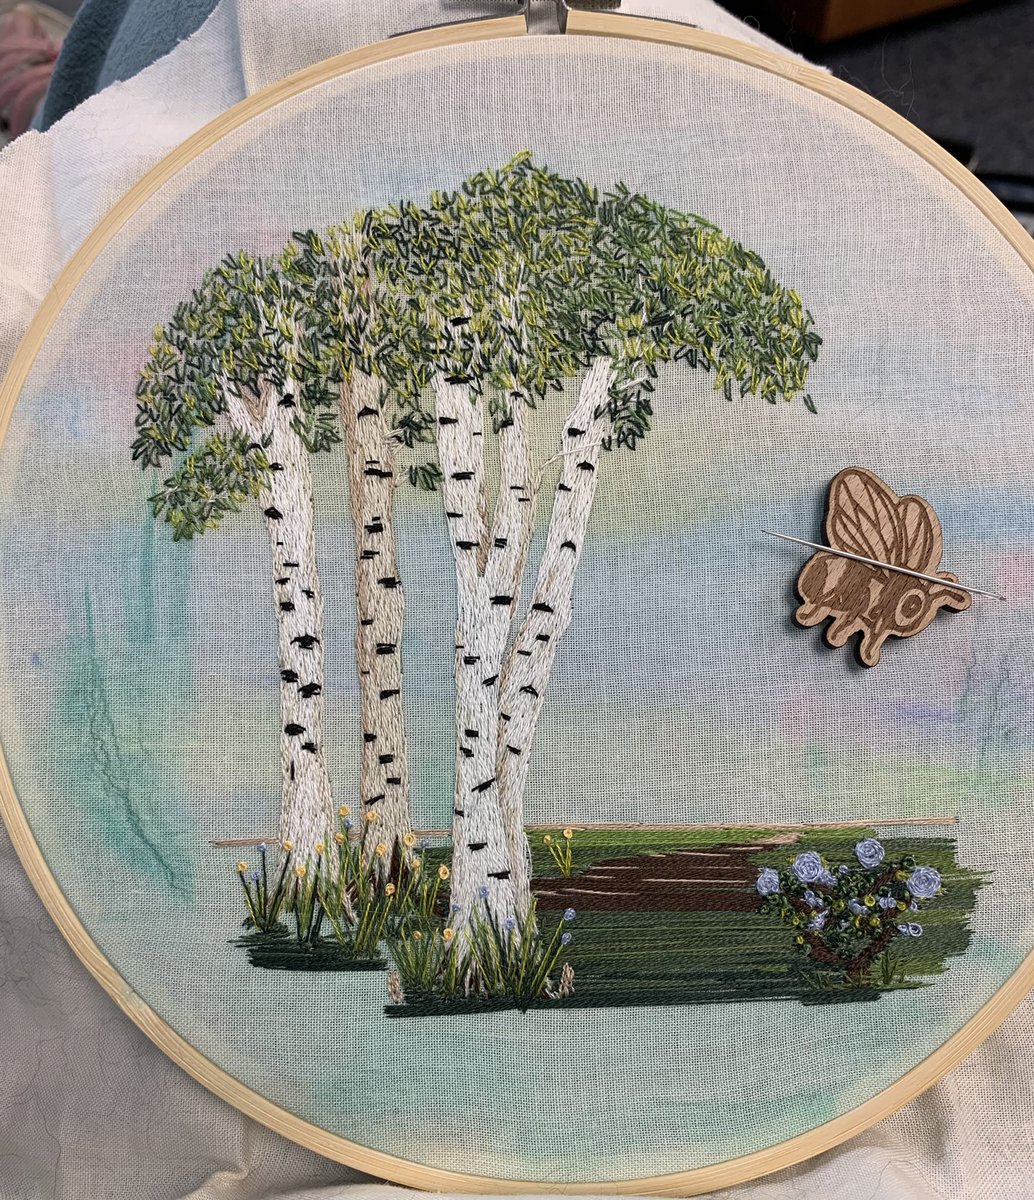 I didn’t really have a plan. A touch of watercolour and away I went. I’m quite pleased with how it’s looking though. #threadpainting #embroidery